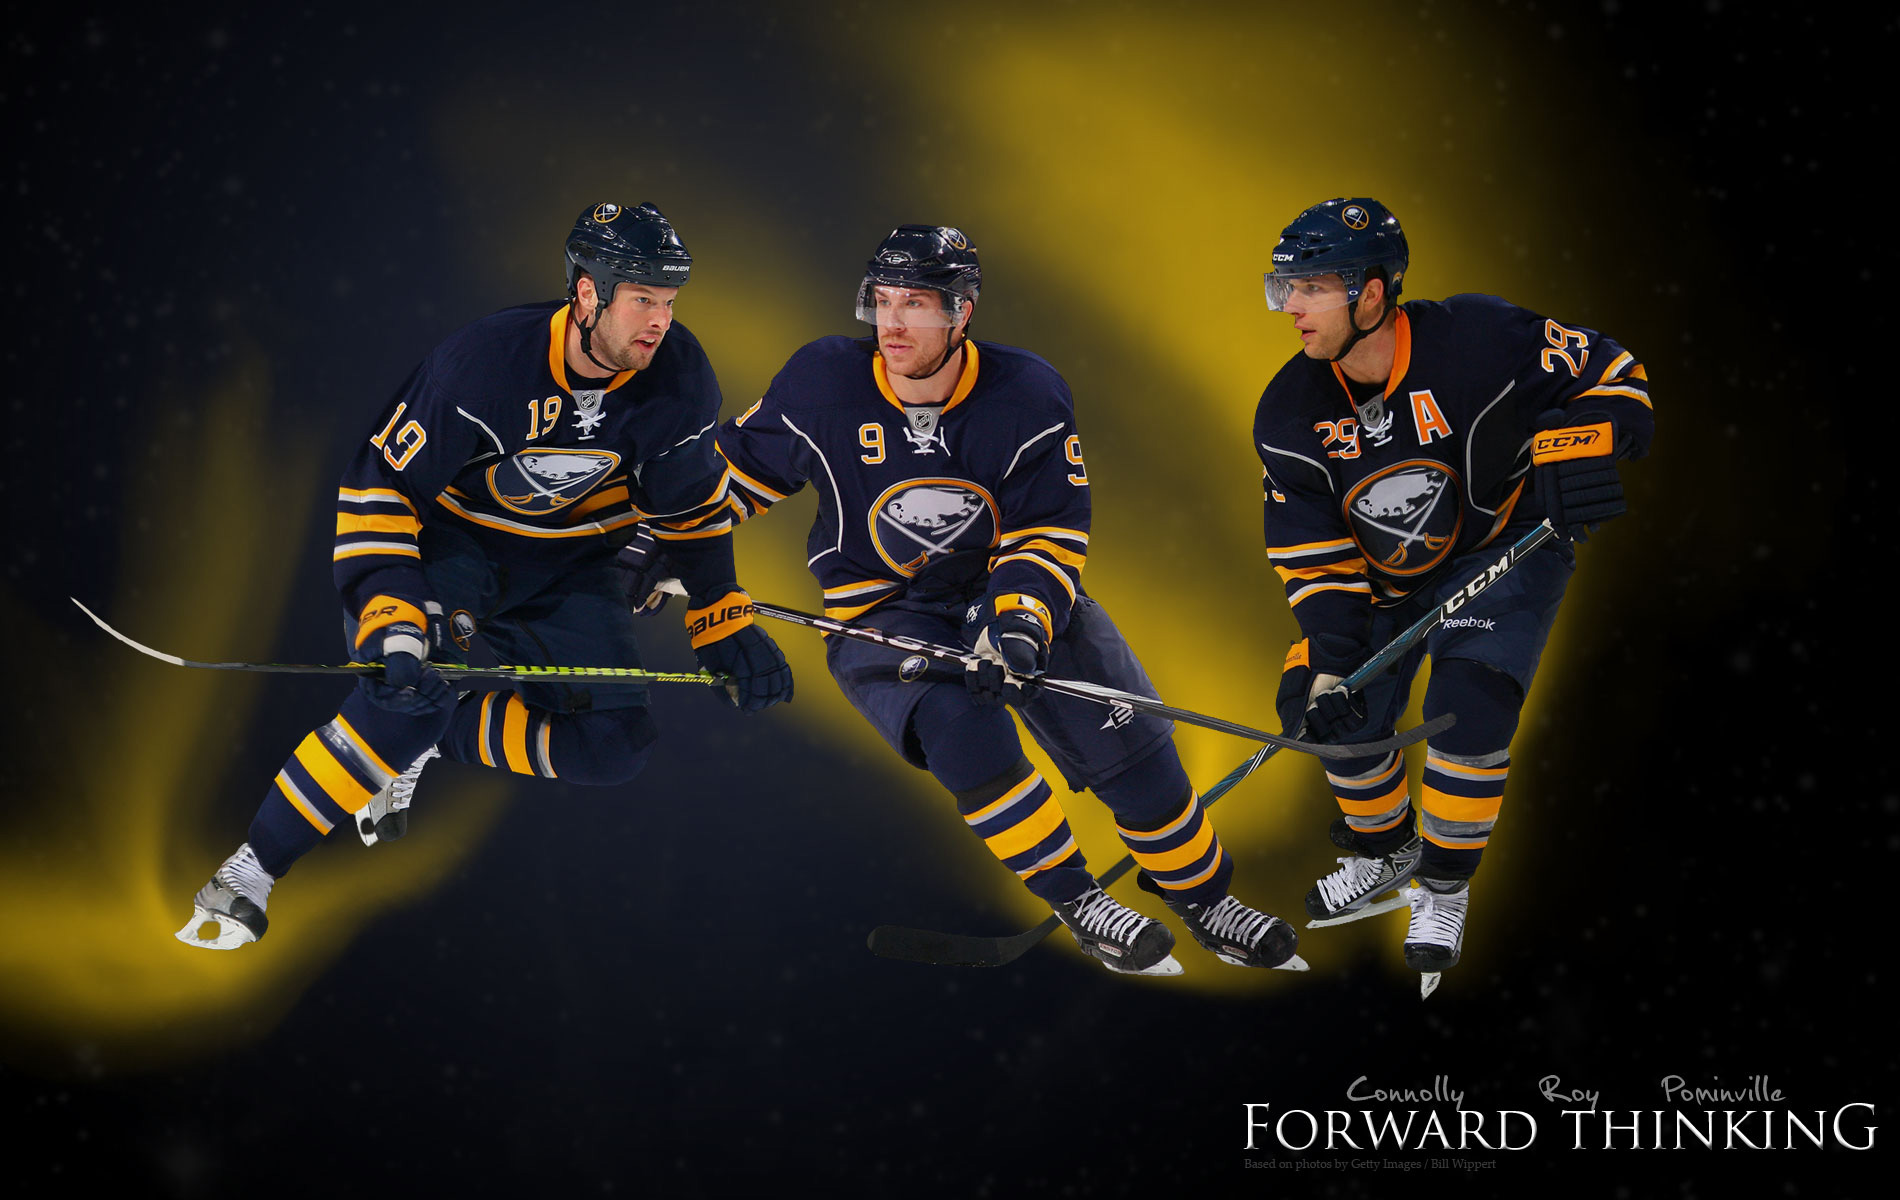 Desktop Wallpaper Sent In To The Buffalo Sabres Fanpaper Section